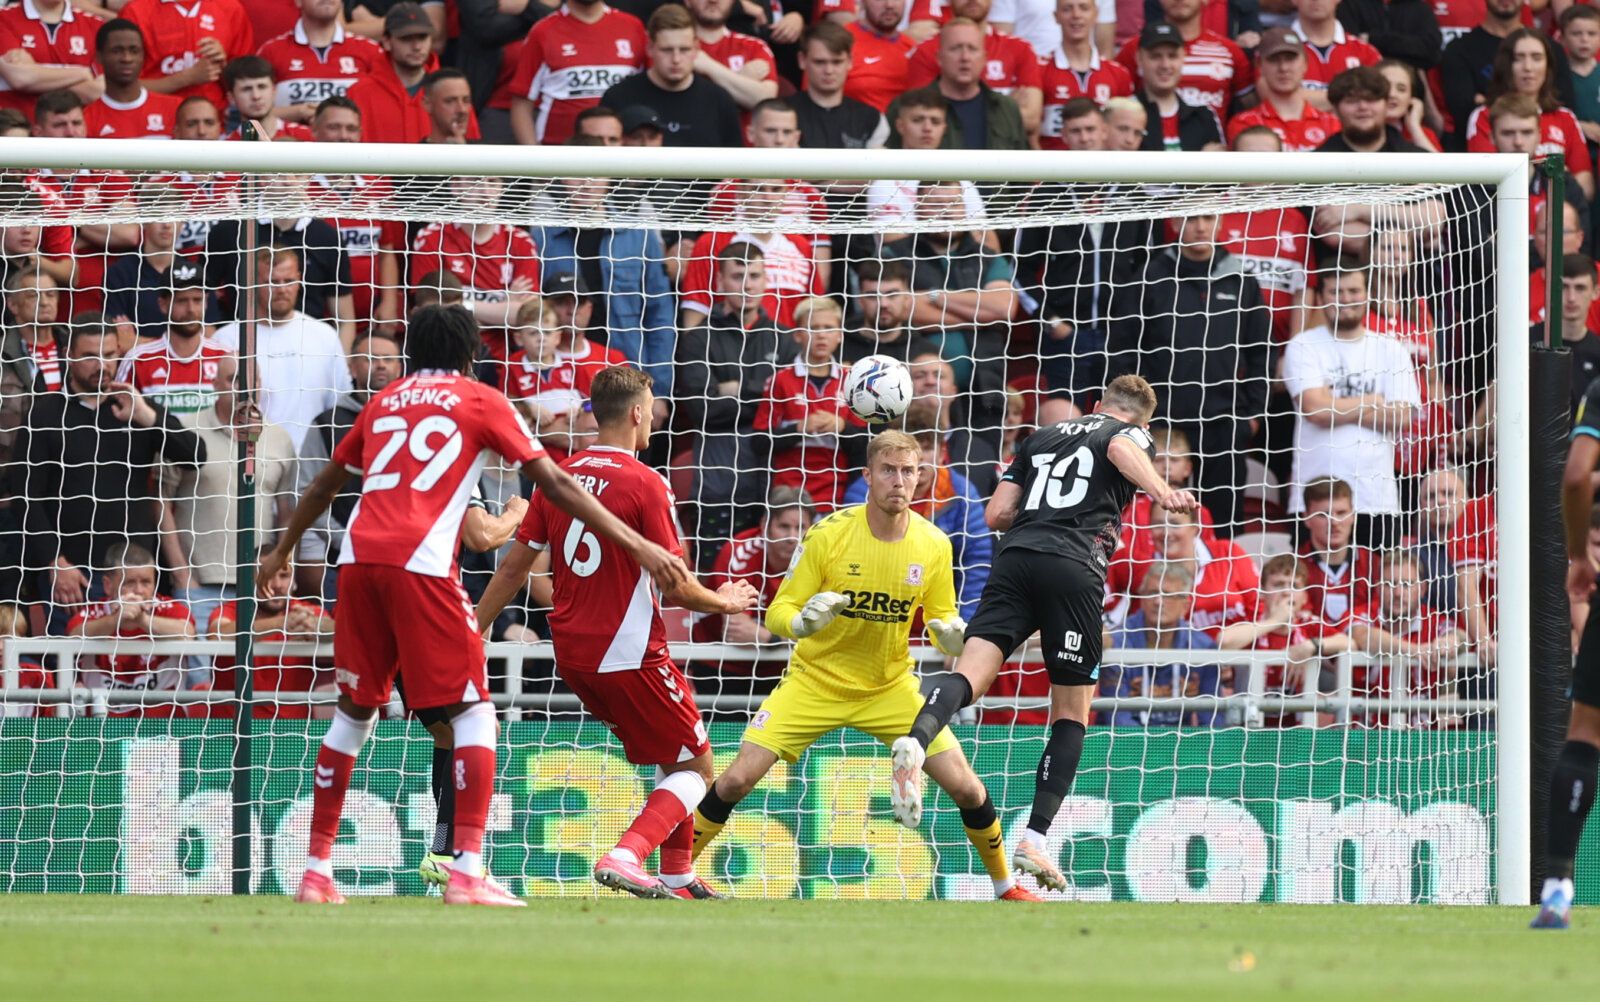 Soccer Football - Championship - Middlesbrough v Bristol City - Riverside Stadium, Middlesbrough, Britain - August 14, 2021 Bristol City's Andy King scores their first goal Action Images/Lee Smith EDITORIAL USE ONLY. No use with unauthorized audio, video, data, fixture lists, club/league logos or 'live' services. Online in-match use limited to 75 images, no video emulation. No use in betting, games or single club /league/player publications.  Please contact your account representative for furthe